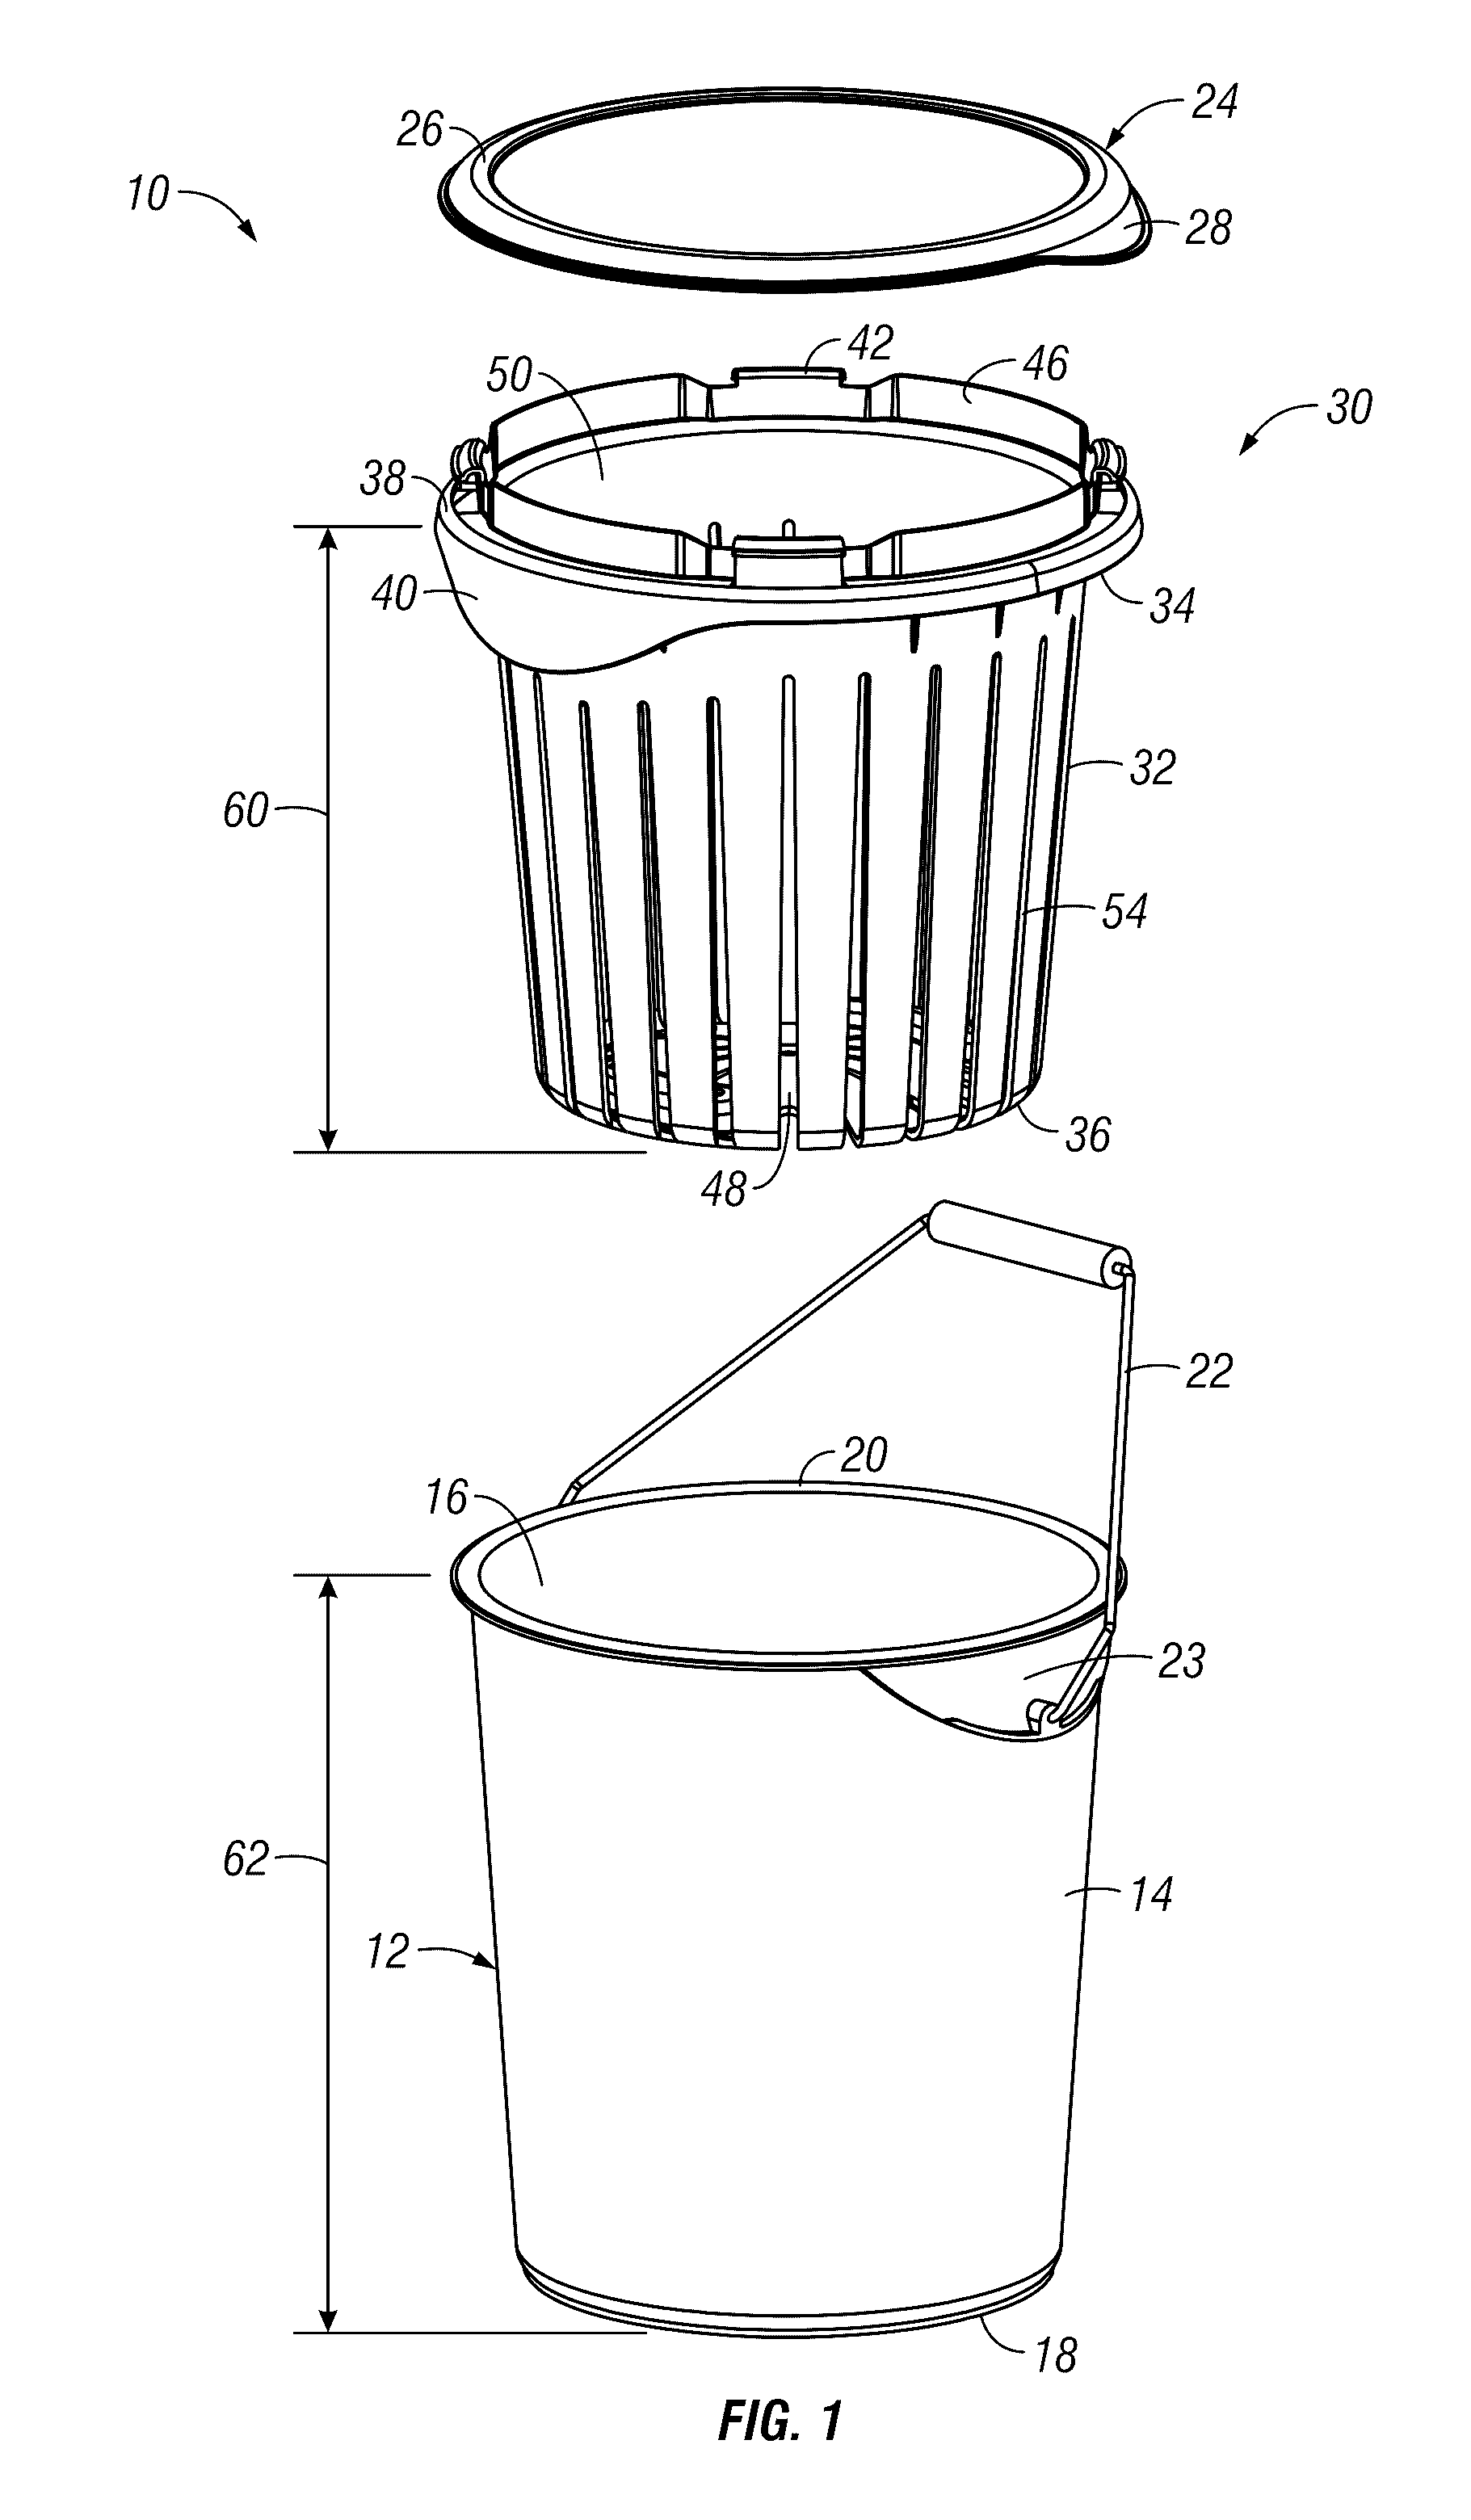 Slotted basket for the soaking and straining of towels, cloths, and other hard surface items